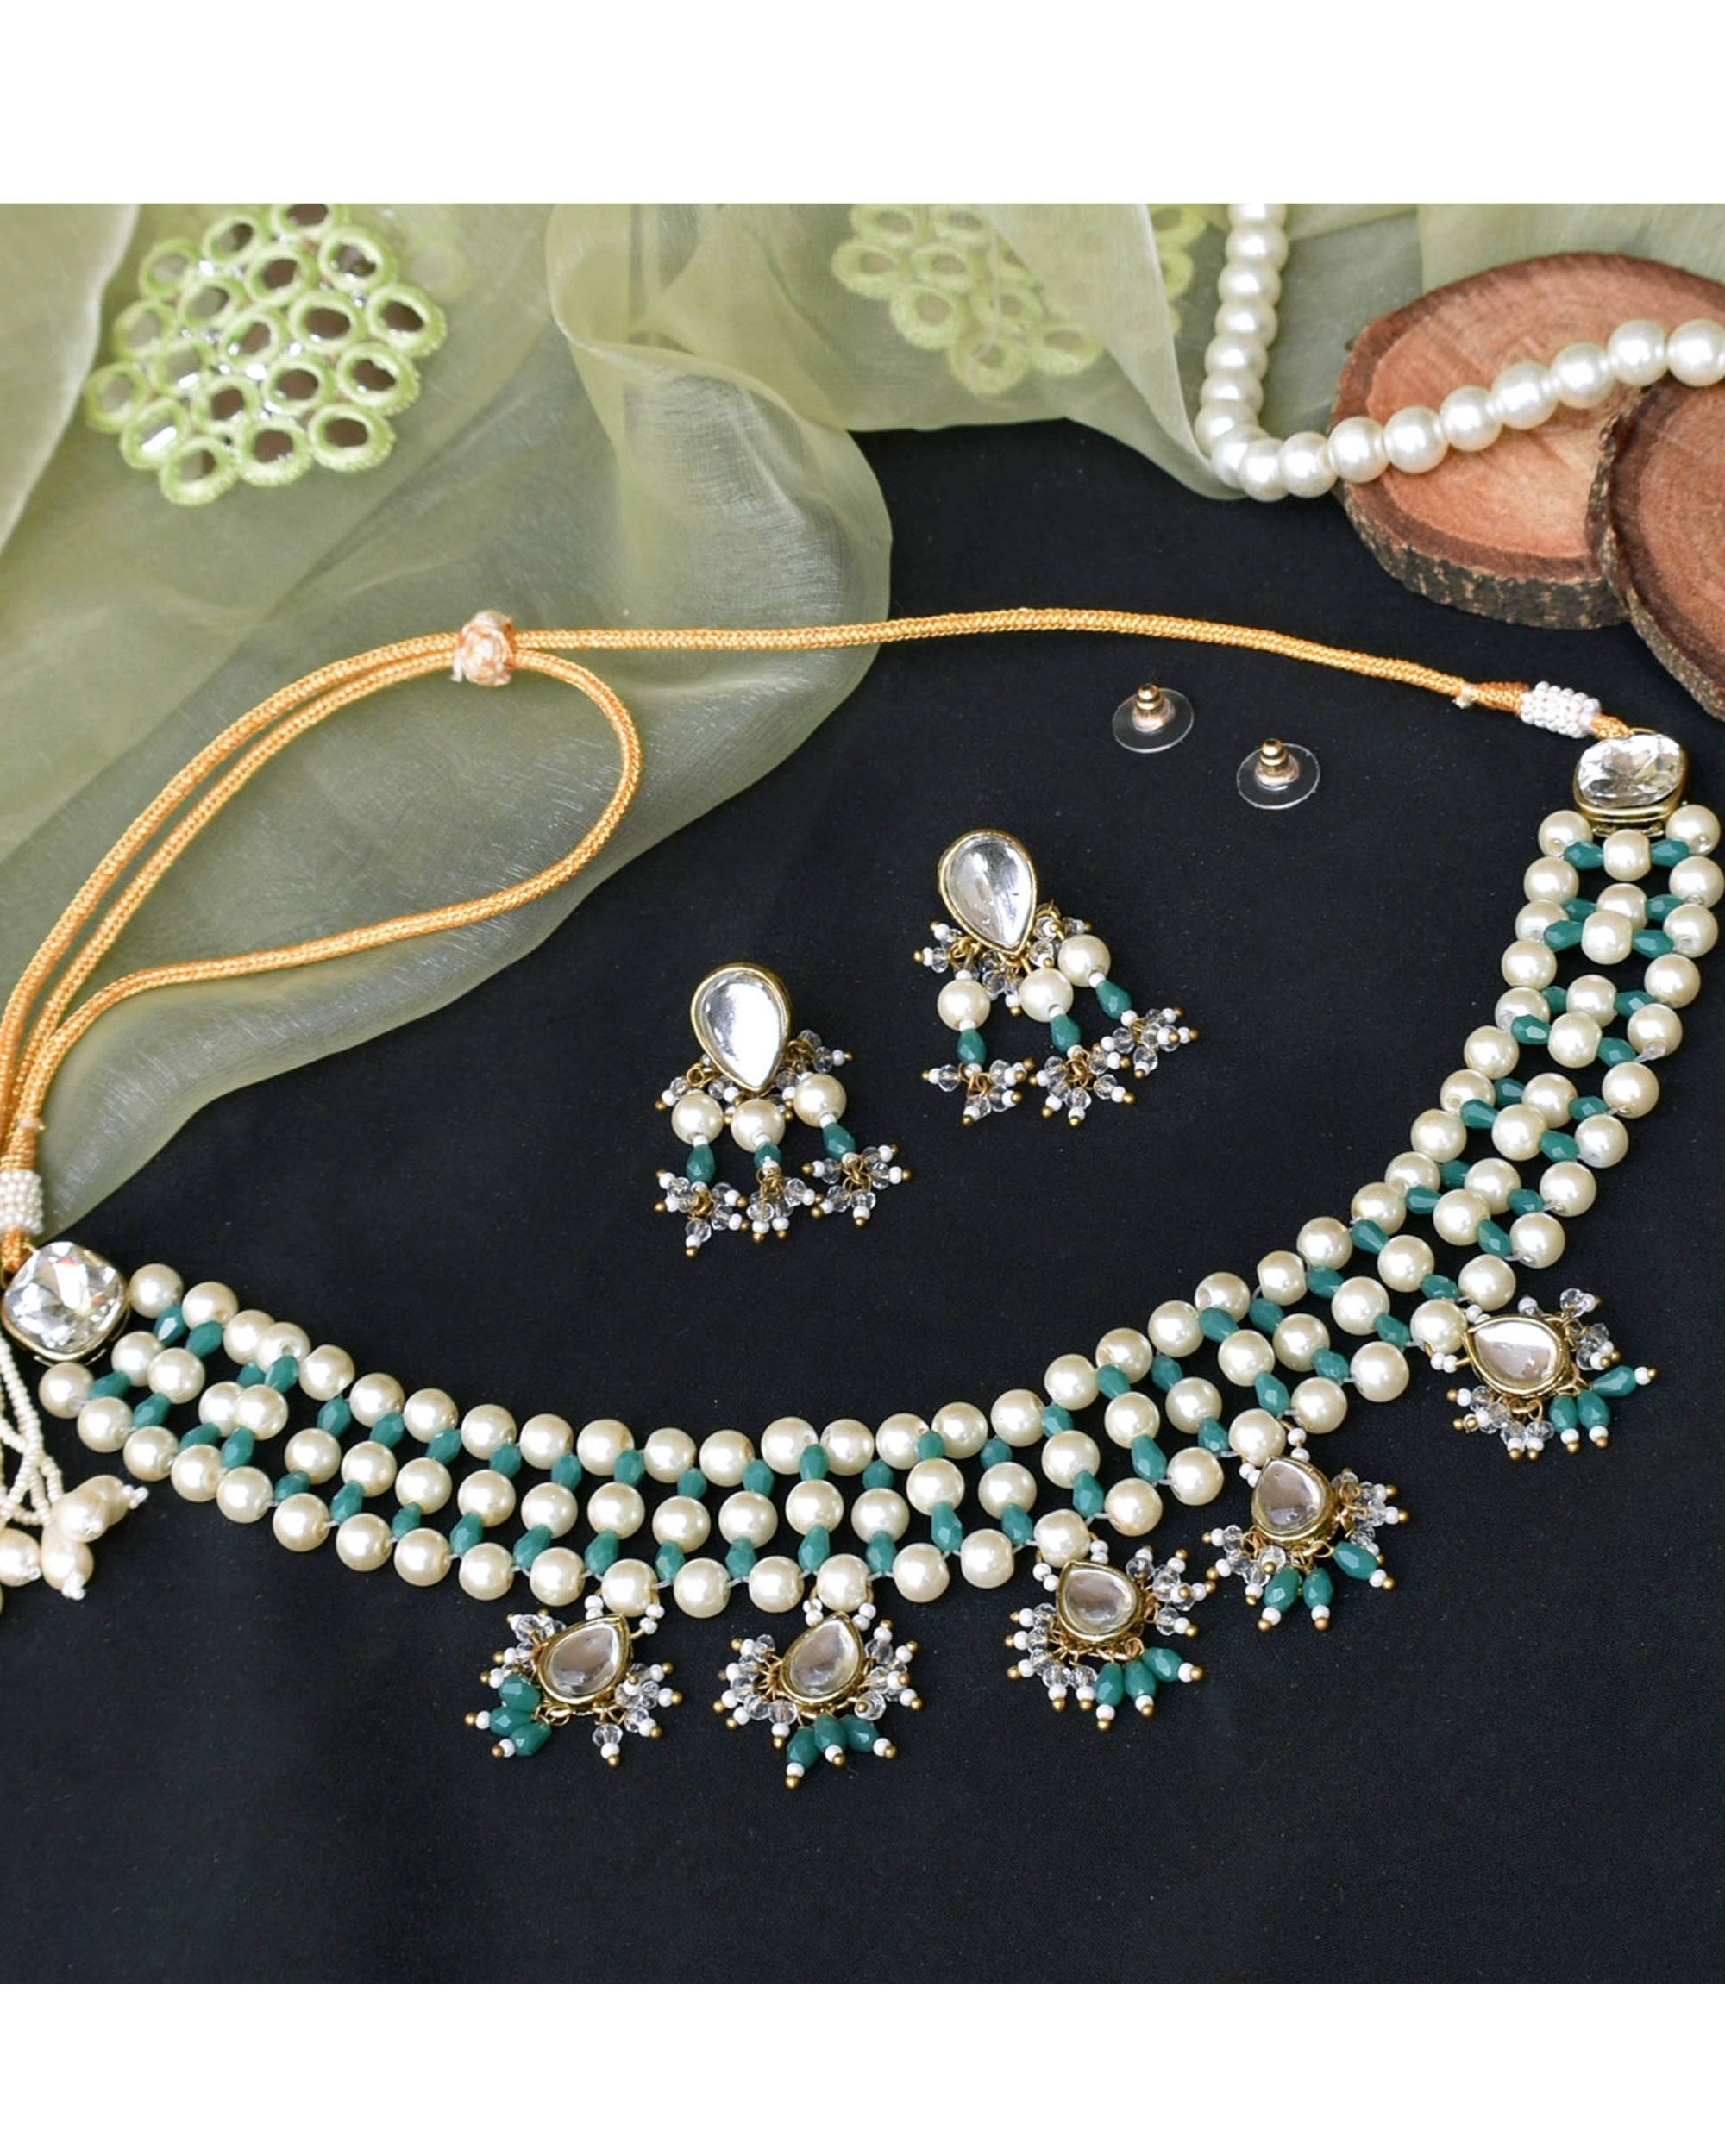 Teal green and white pearl beaded tiered neckpiece with earrings - set of two